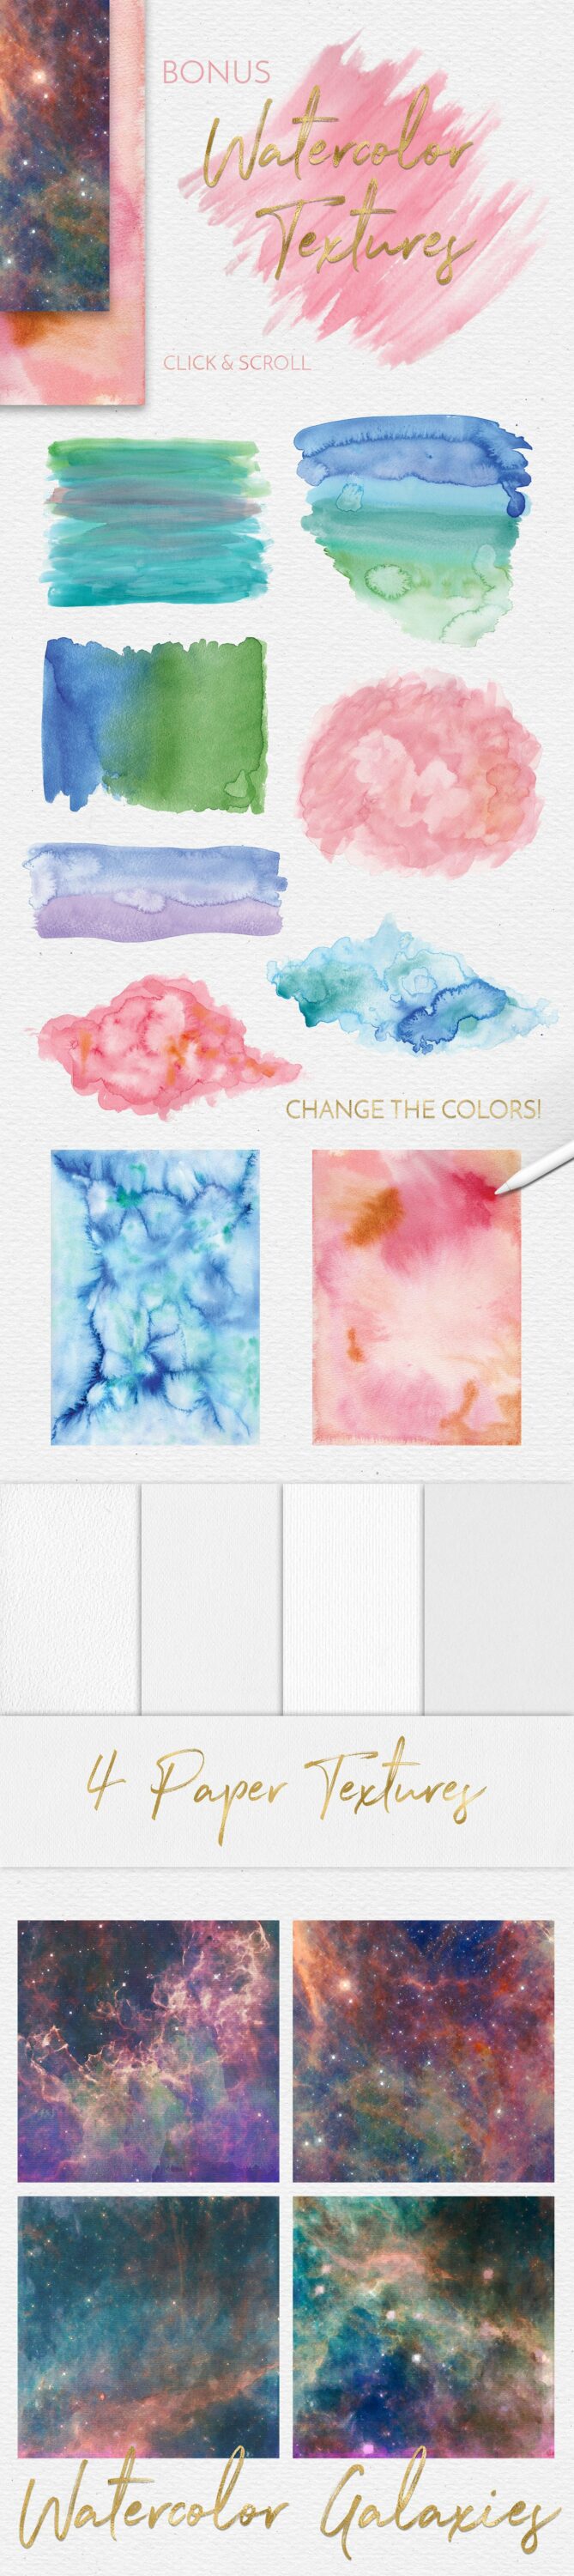 You will get a lot of watercolor elements and 4 paper textures.